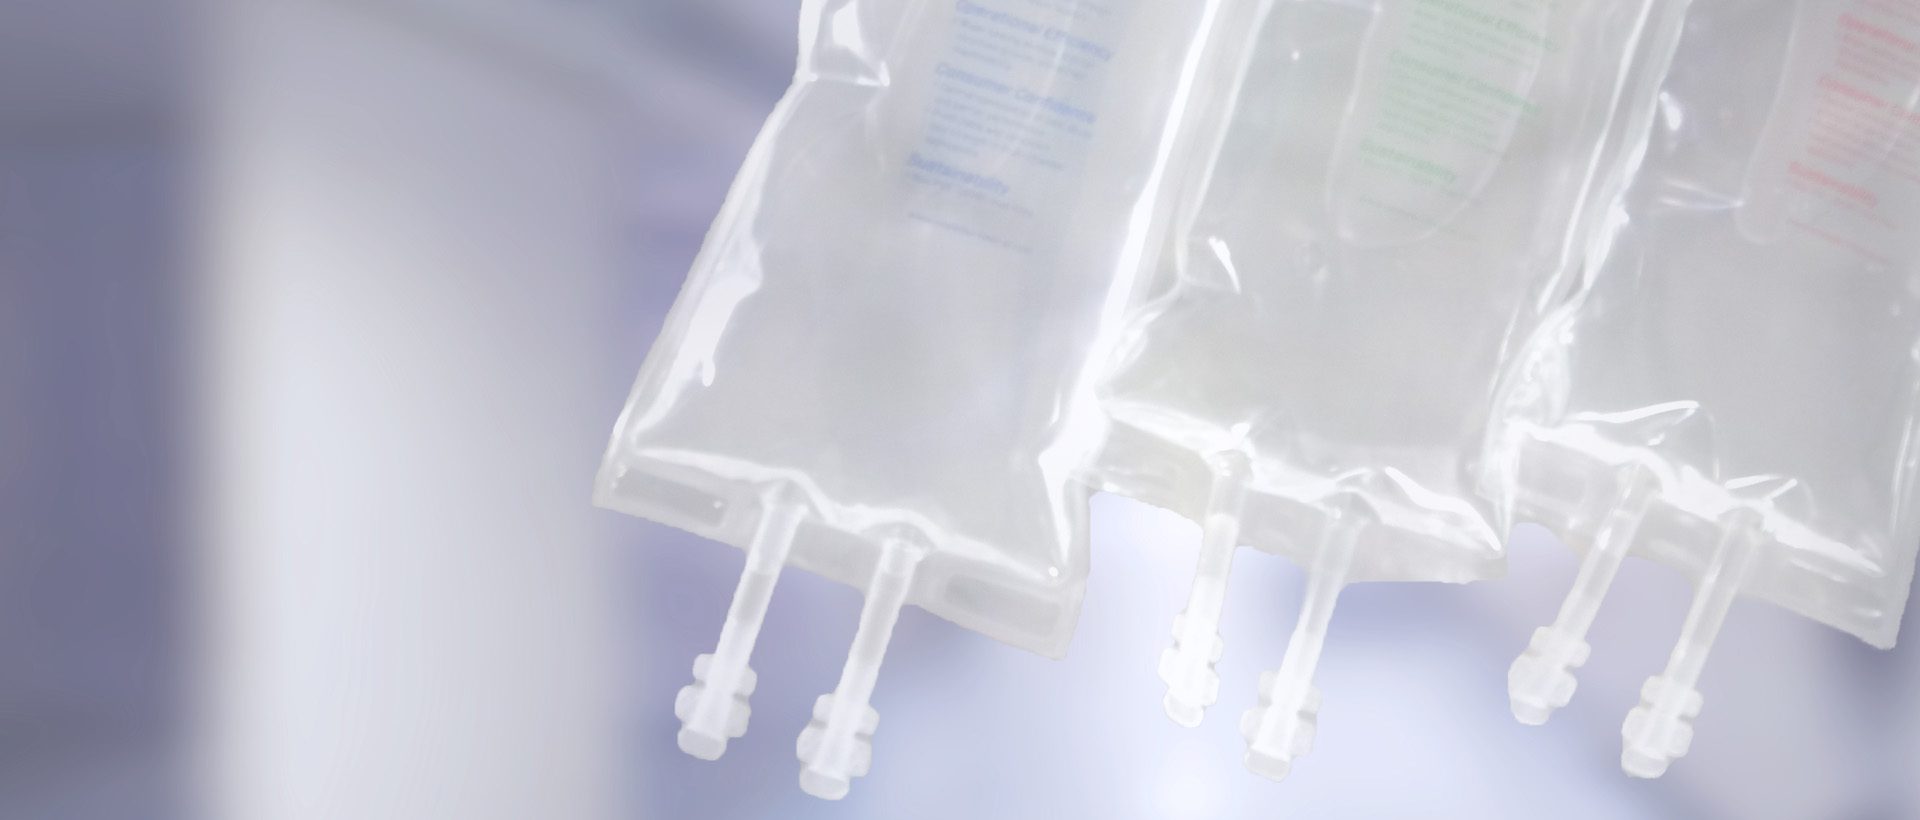 IV Bags used in Medical Films